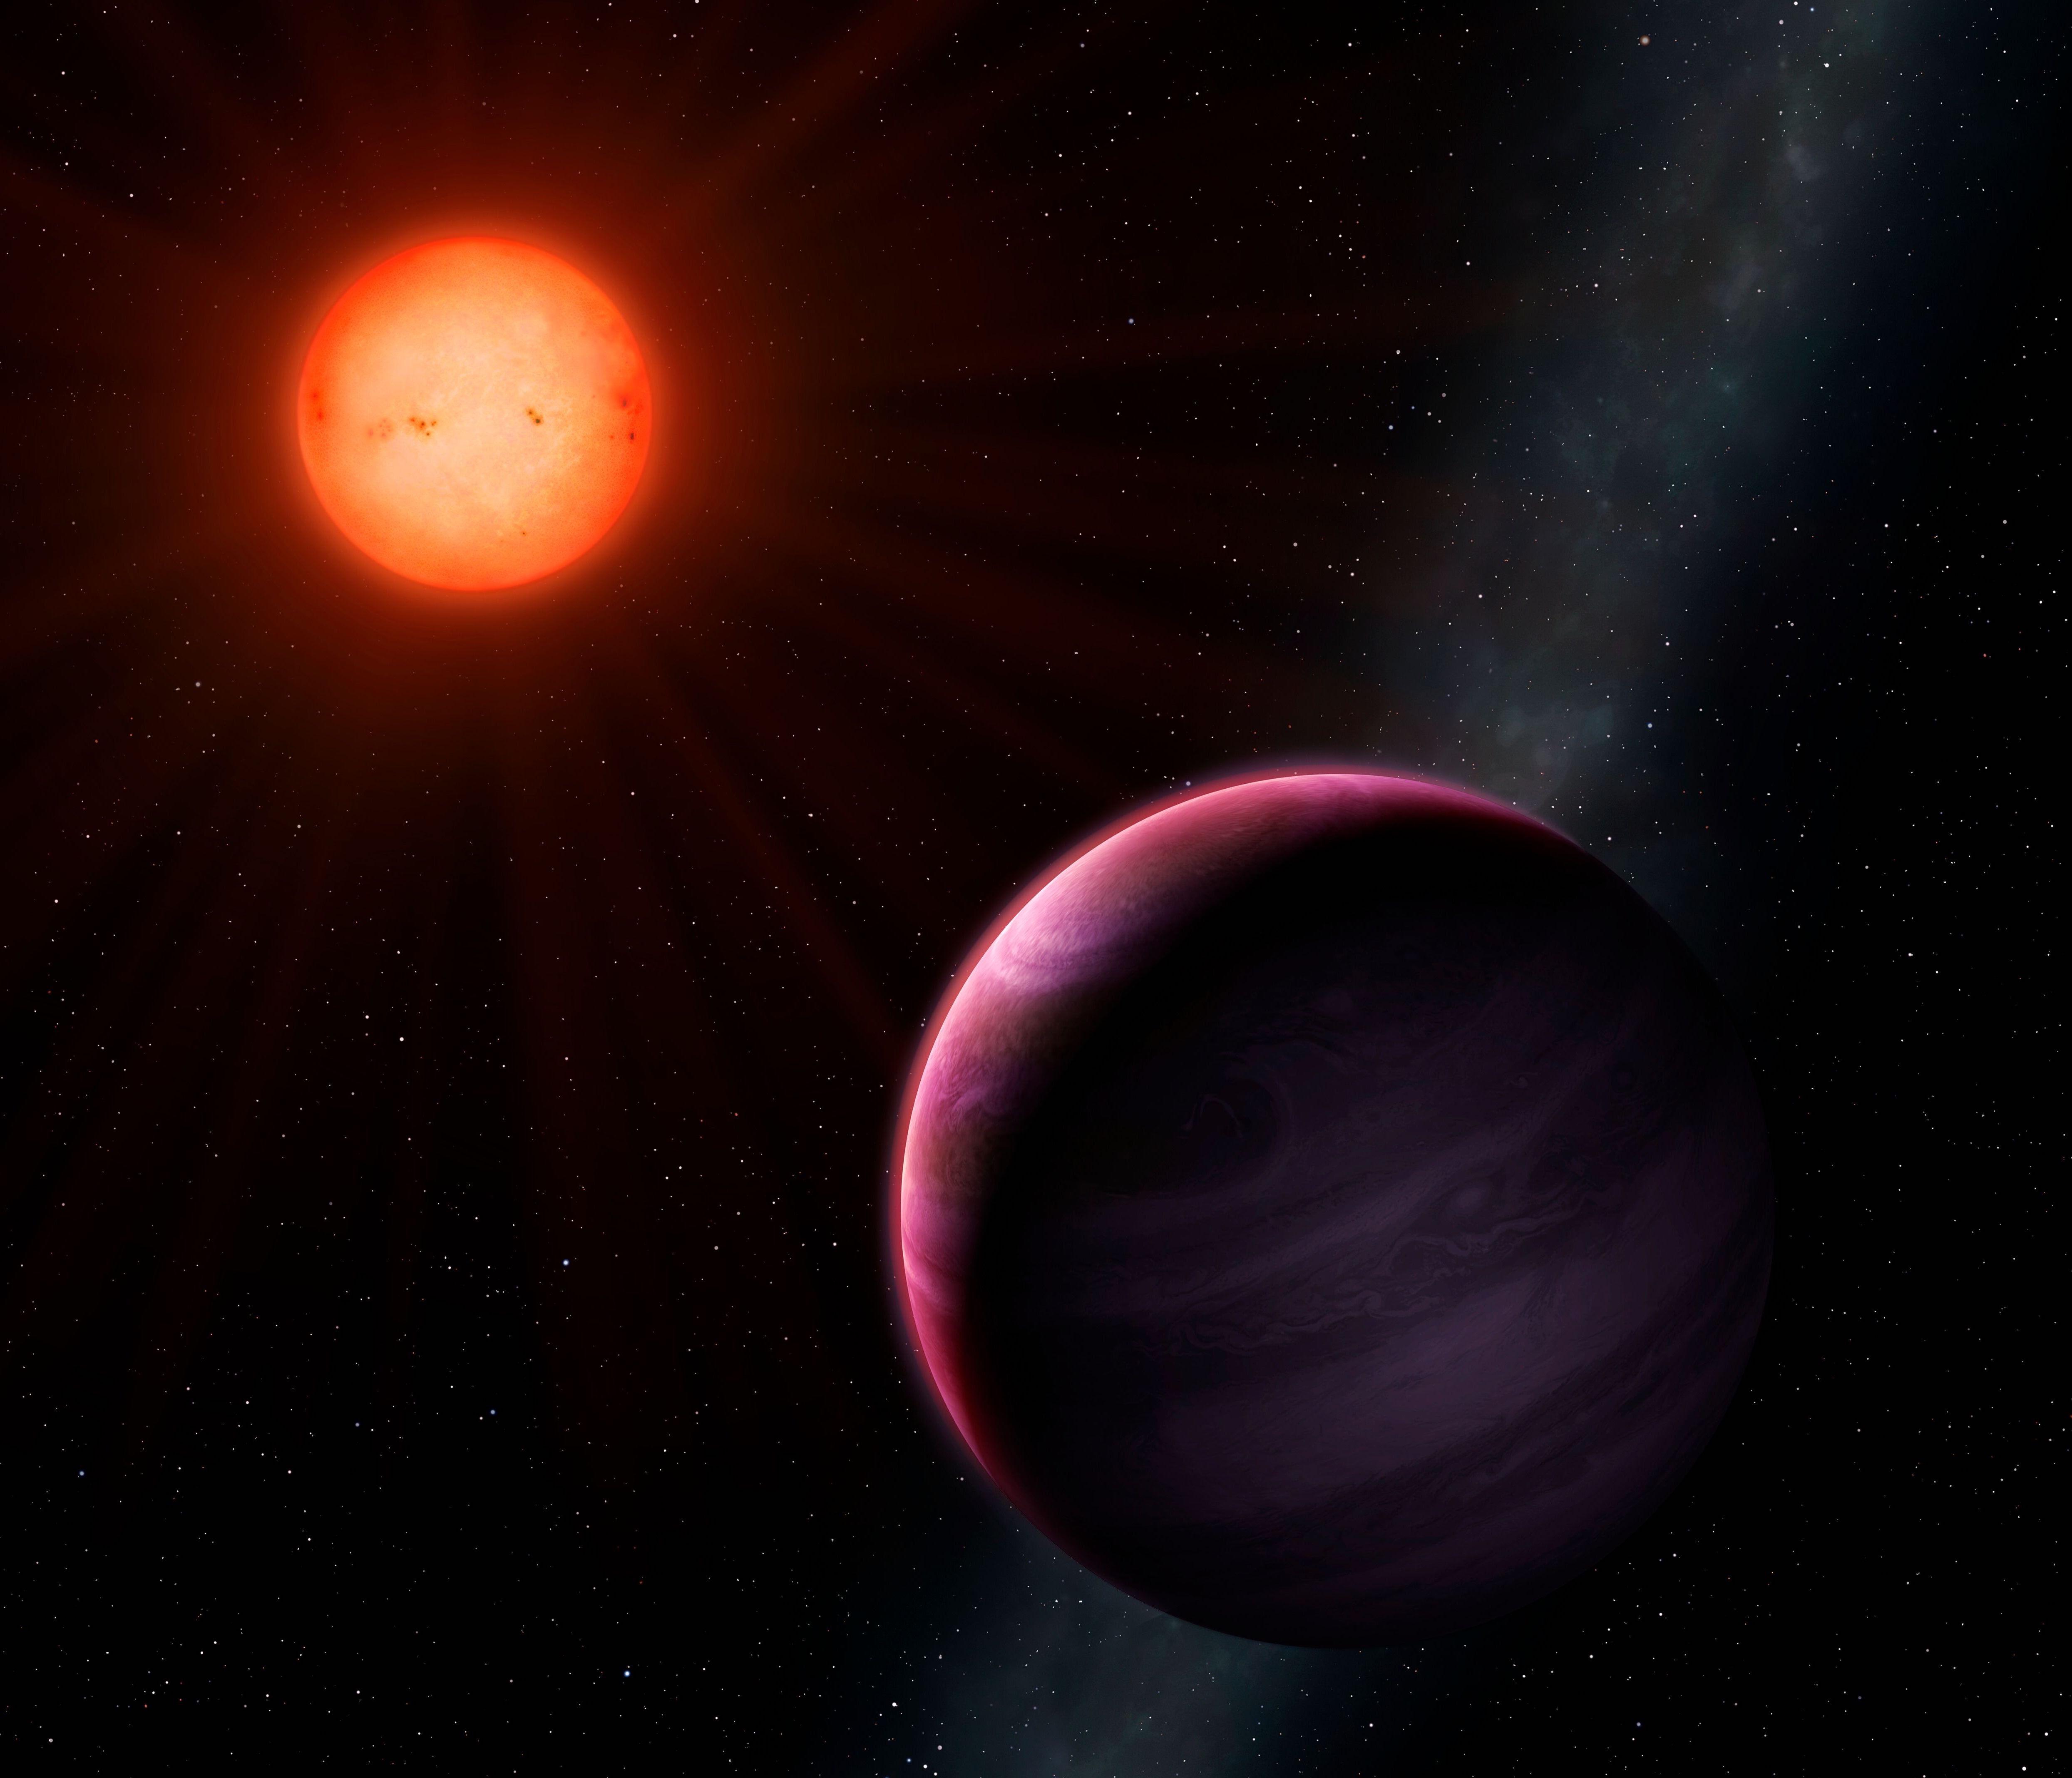  ‘Monster’ planet discovery challenges formation theory